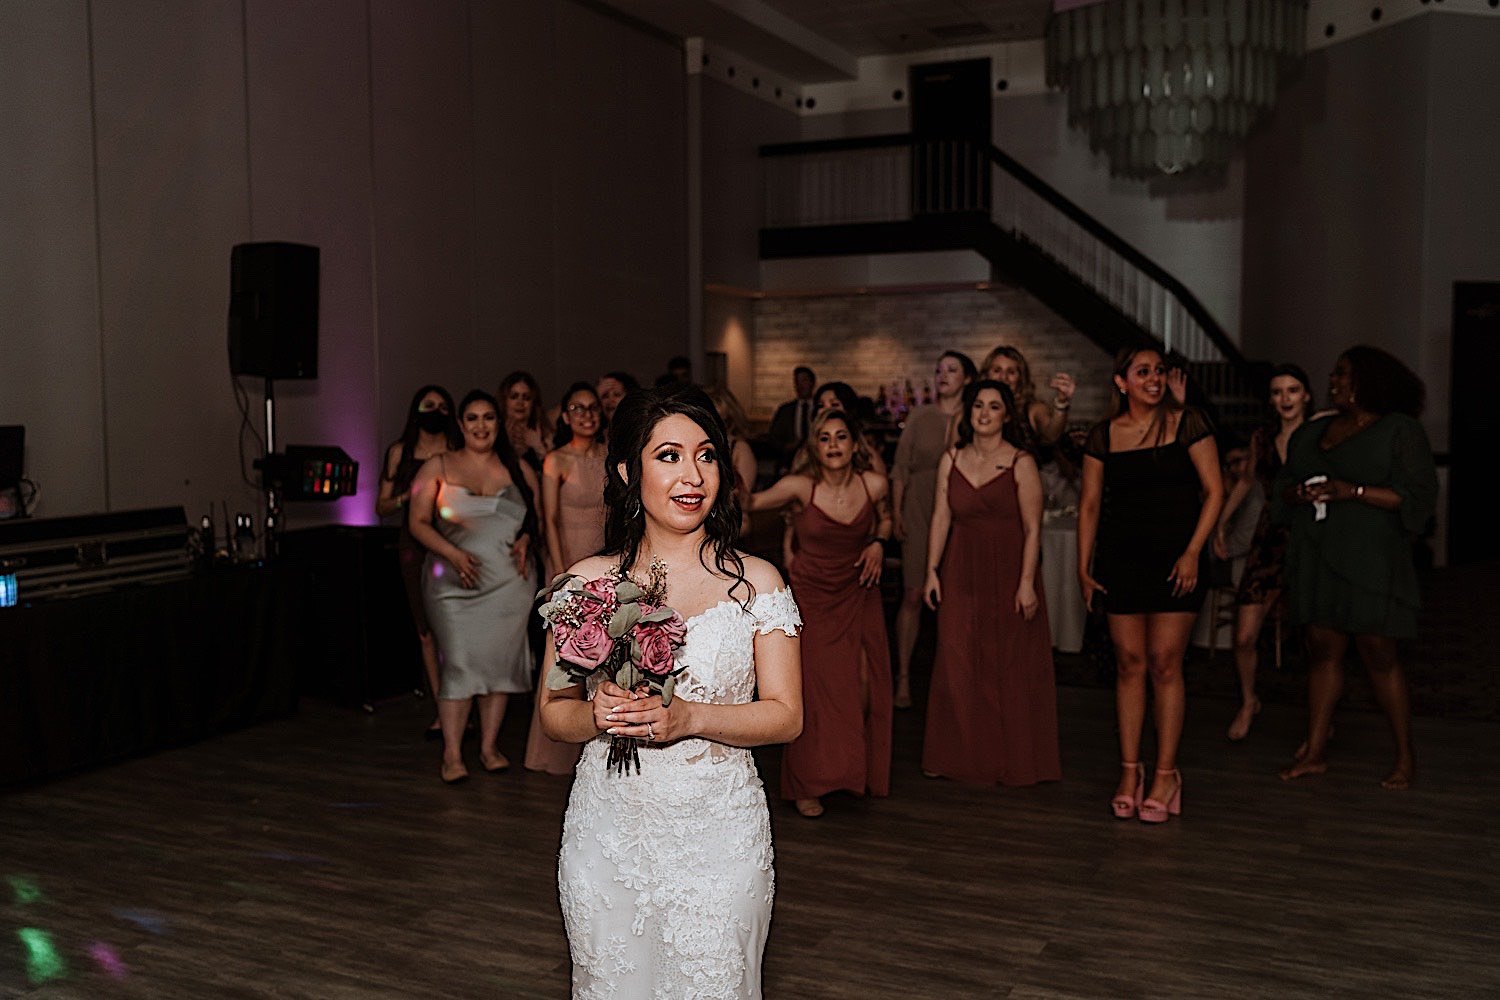 Bride prepares to toss the bouquet to guests standing behind her during Chicagoland ballroom wedding reception